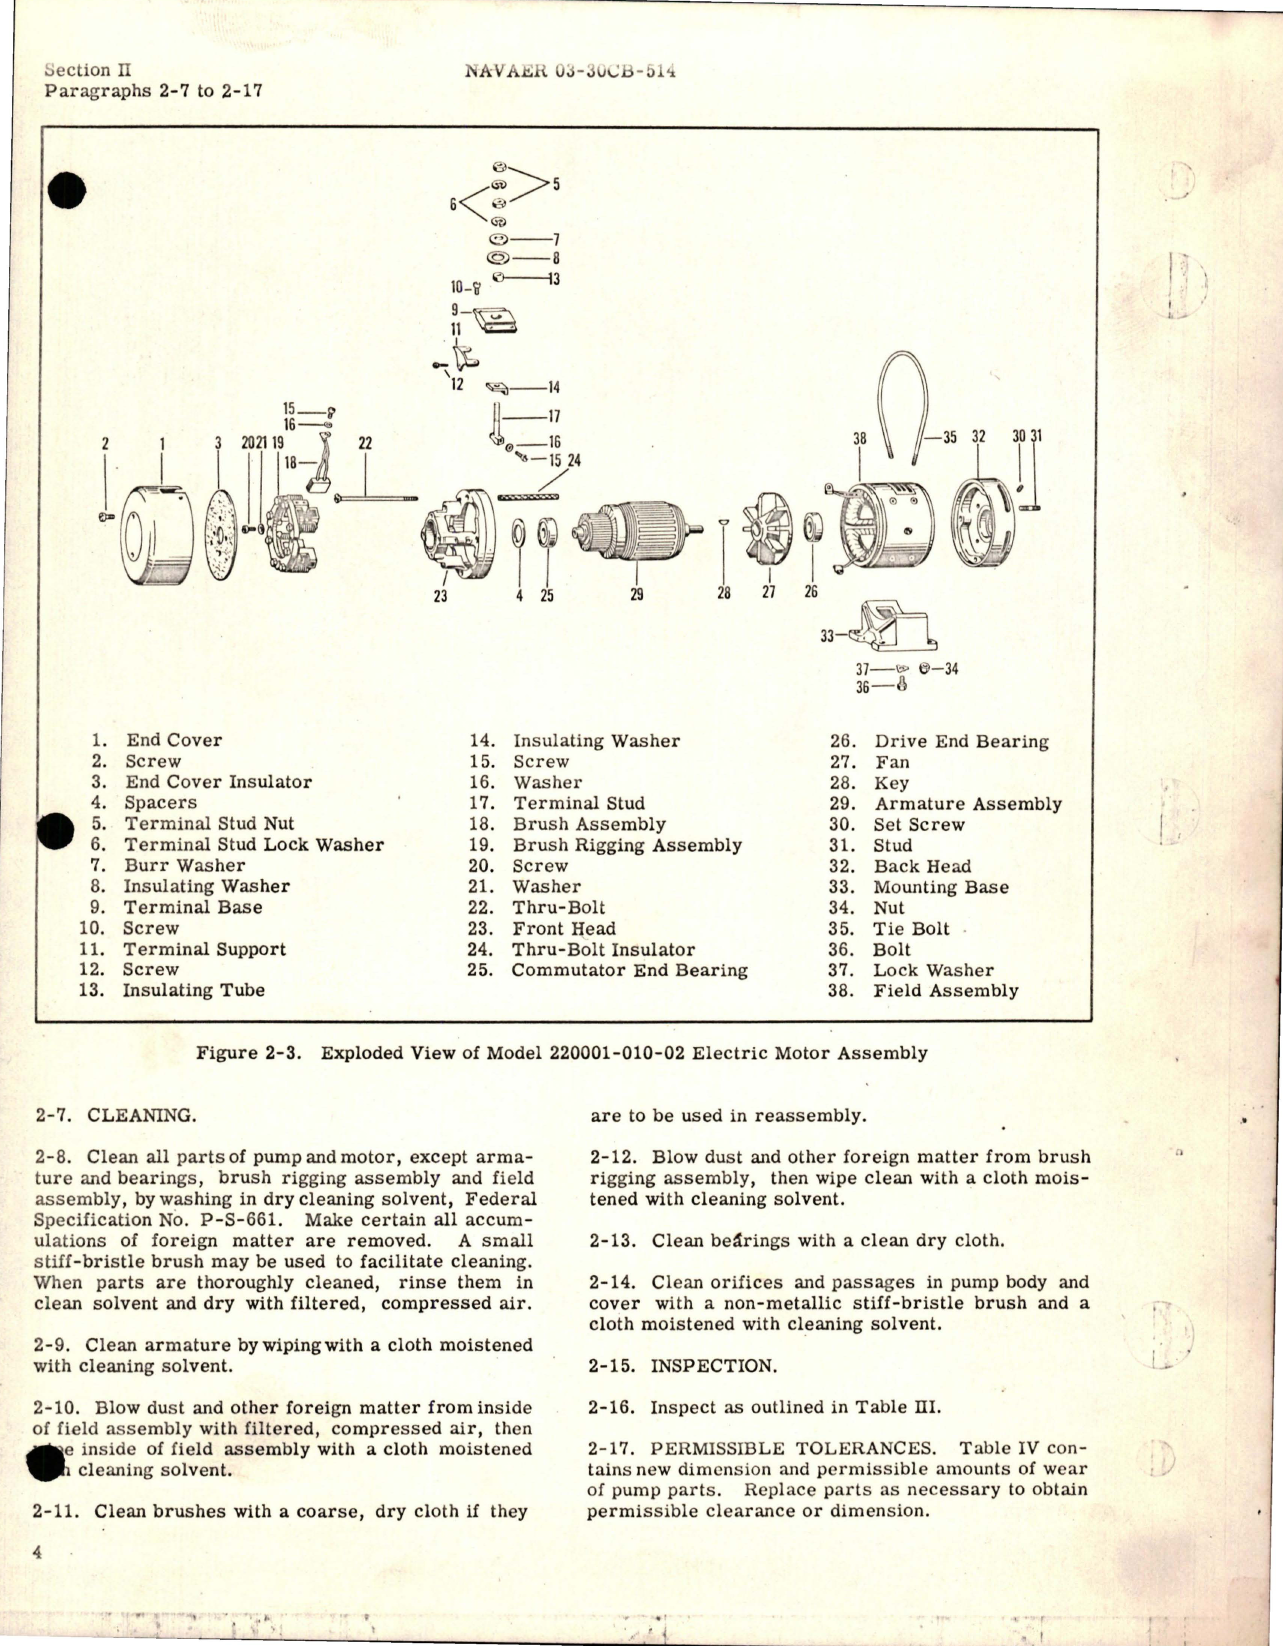 Sample page 7 from AirCorps Library document: Overhaul Instructions for Electric Motor-Driven Hydraulic Gear Type Pump - Model 1E-777 Series